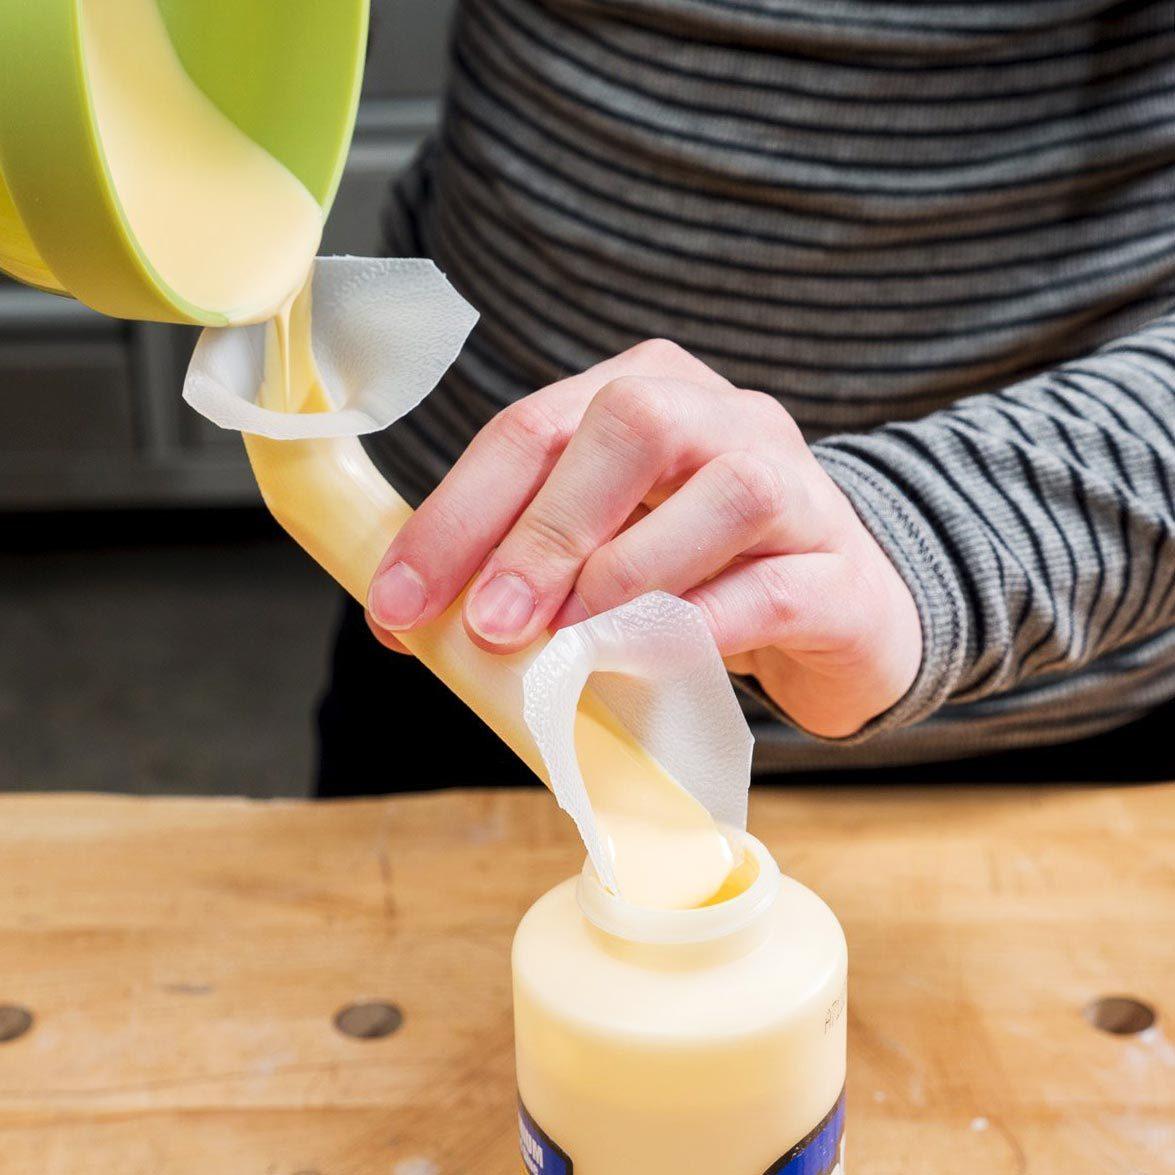 close up of hands using a Milk Jug as a Funnel to pour glue into a small container